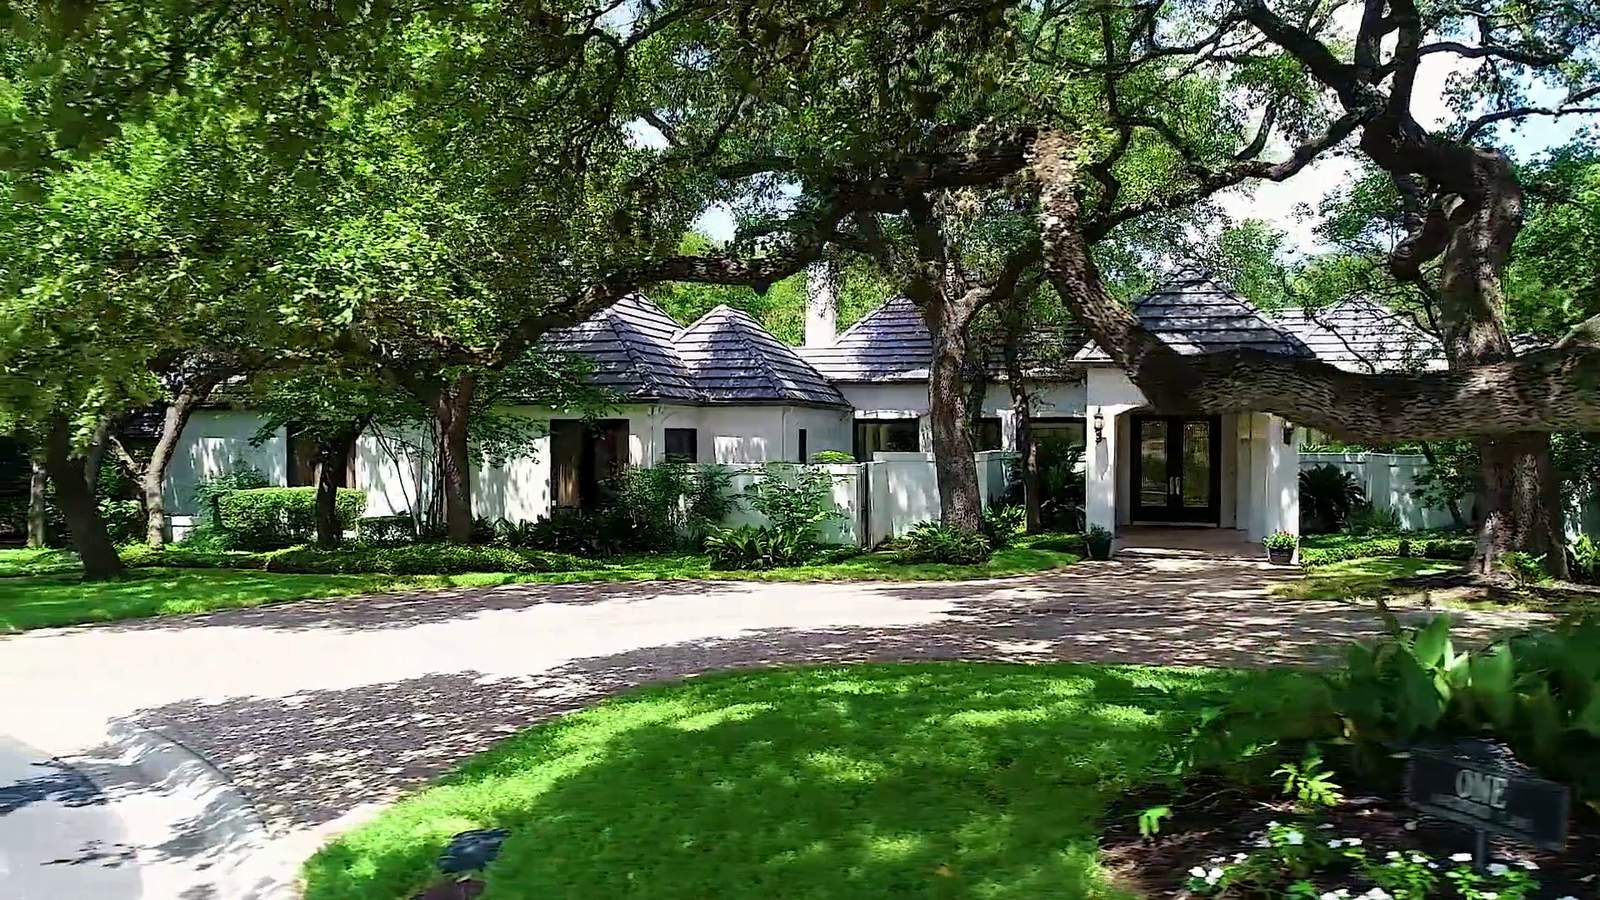 These San Antonio area ZIP codes have the highest average selling price for homes